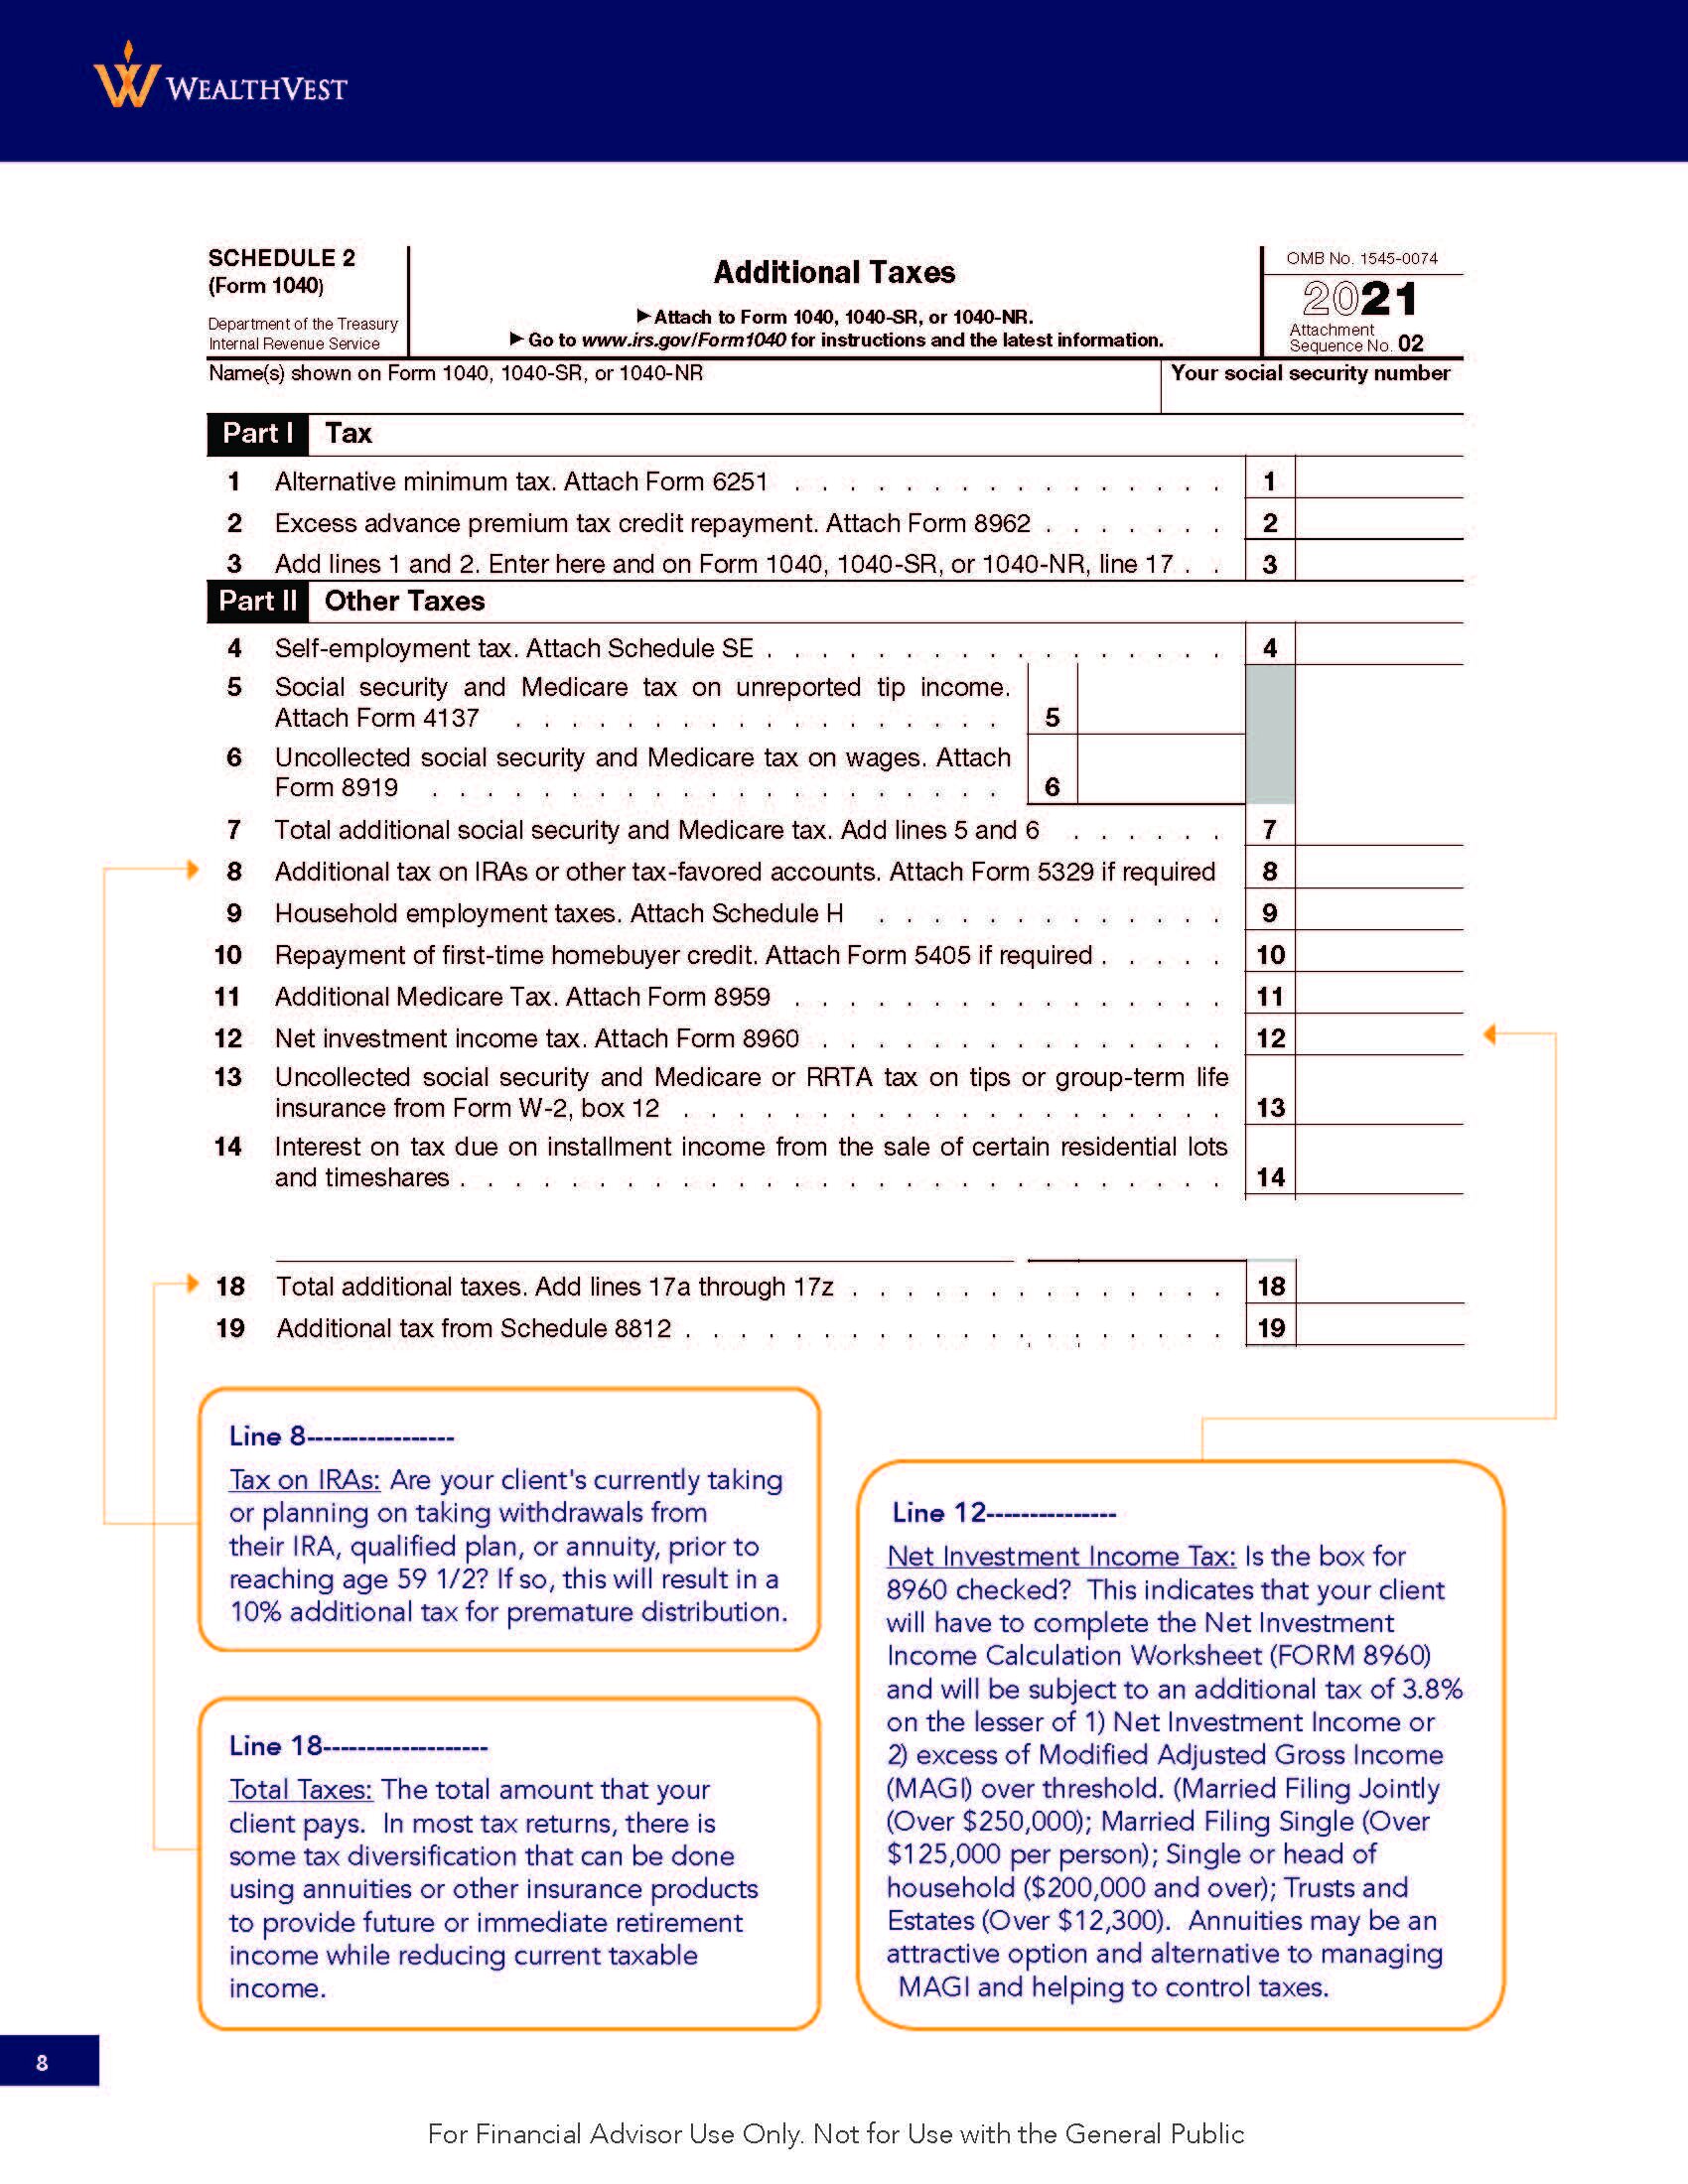 33010 - 1040 Tax Guide 2022_Page_08.jpg